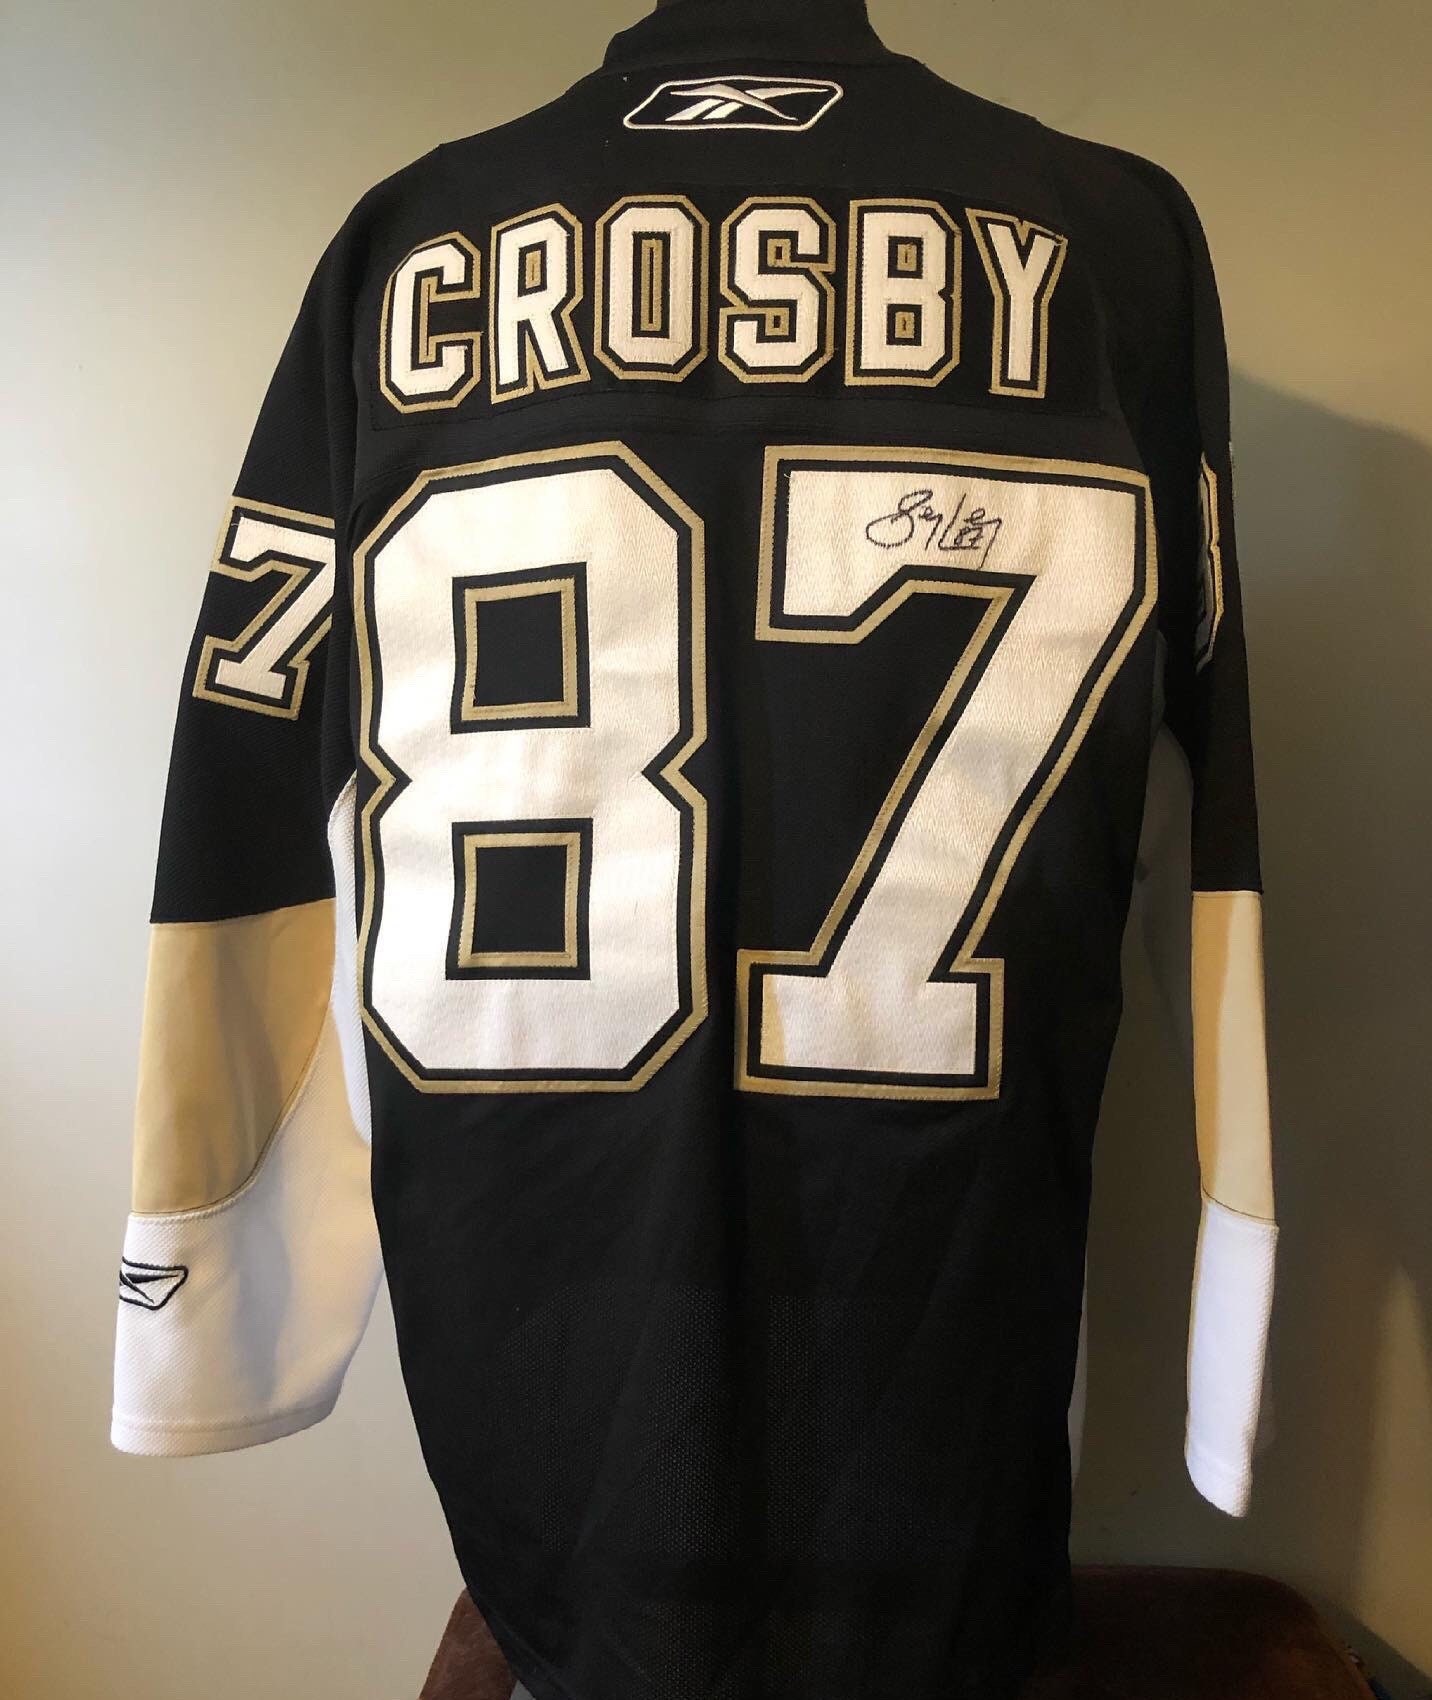 Sidney Crosby Autographed and Framed Black Pittsburgh Penguins Jersey